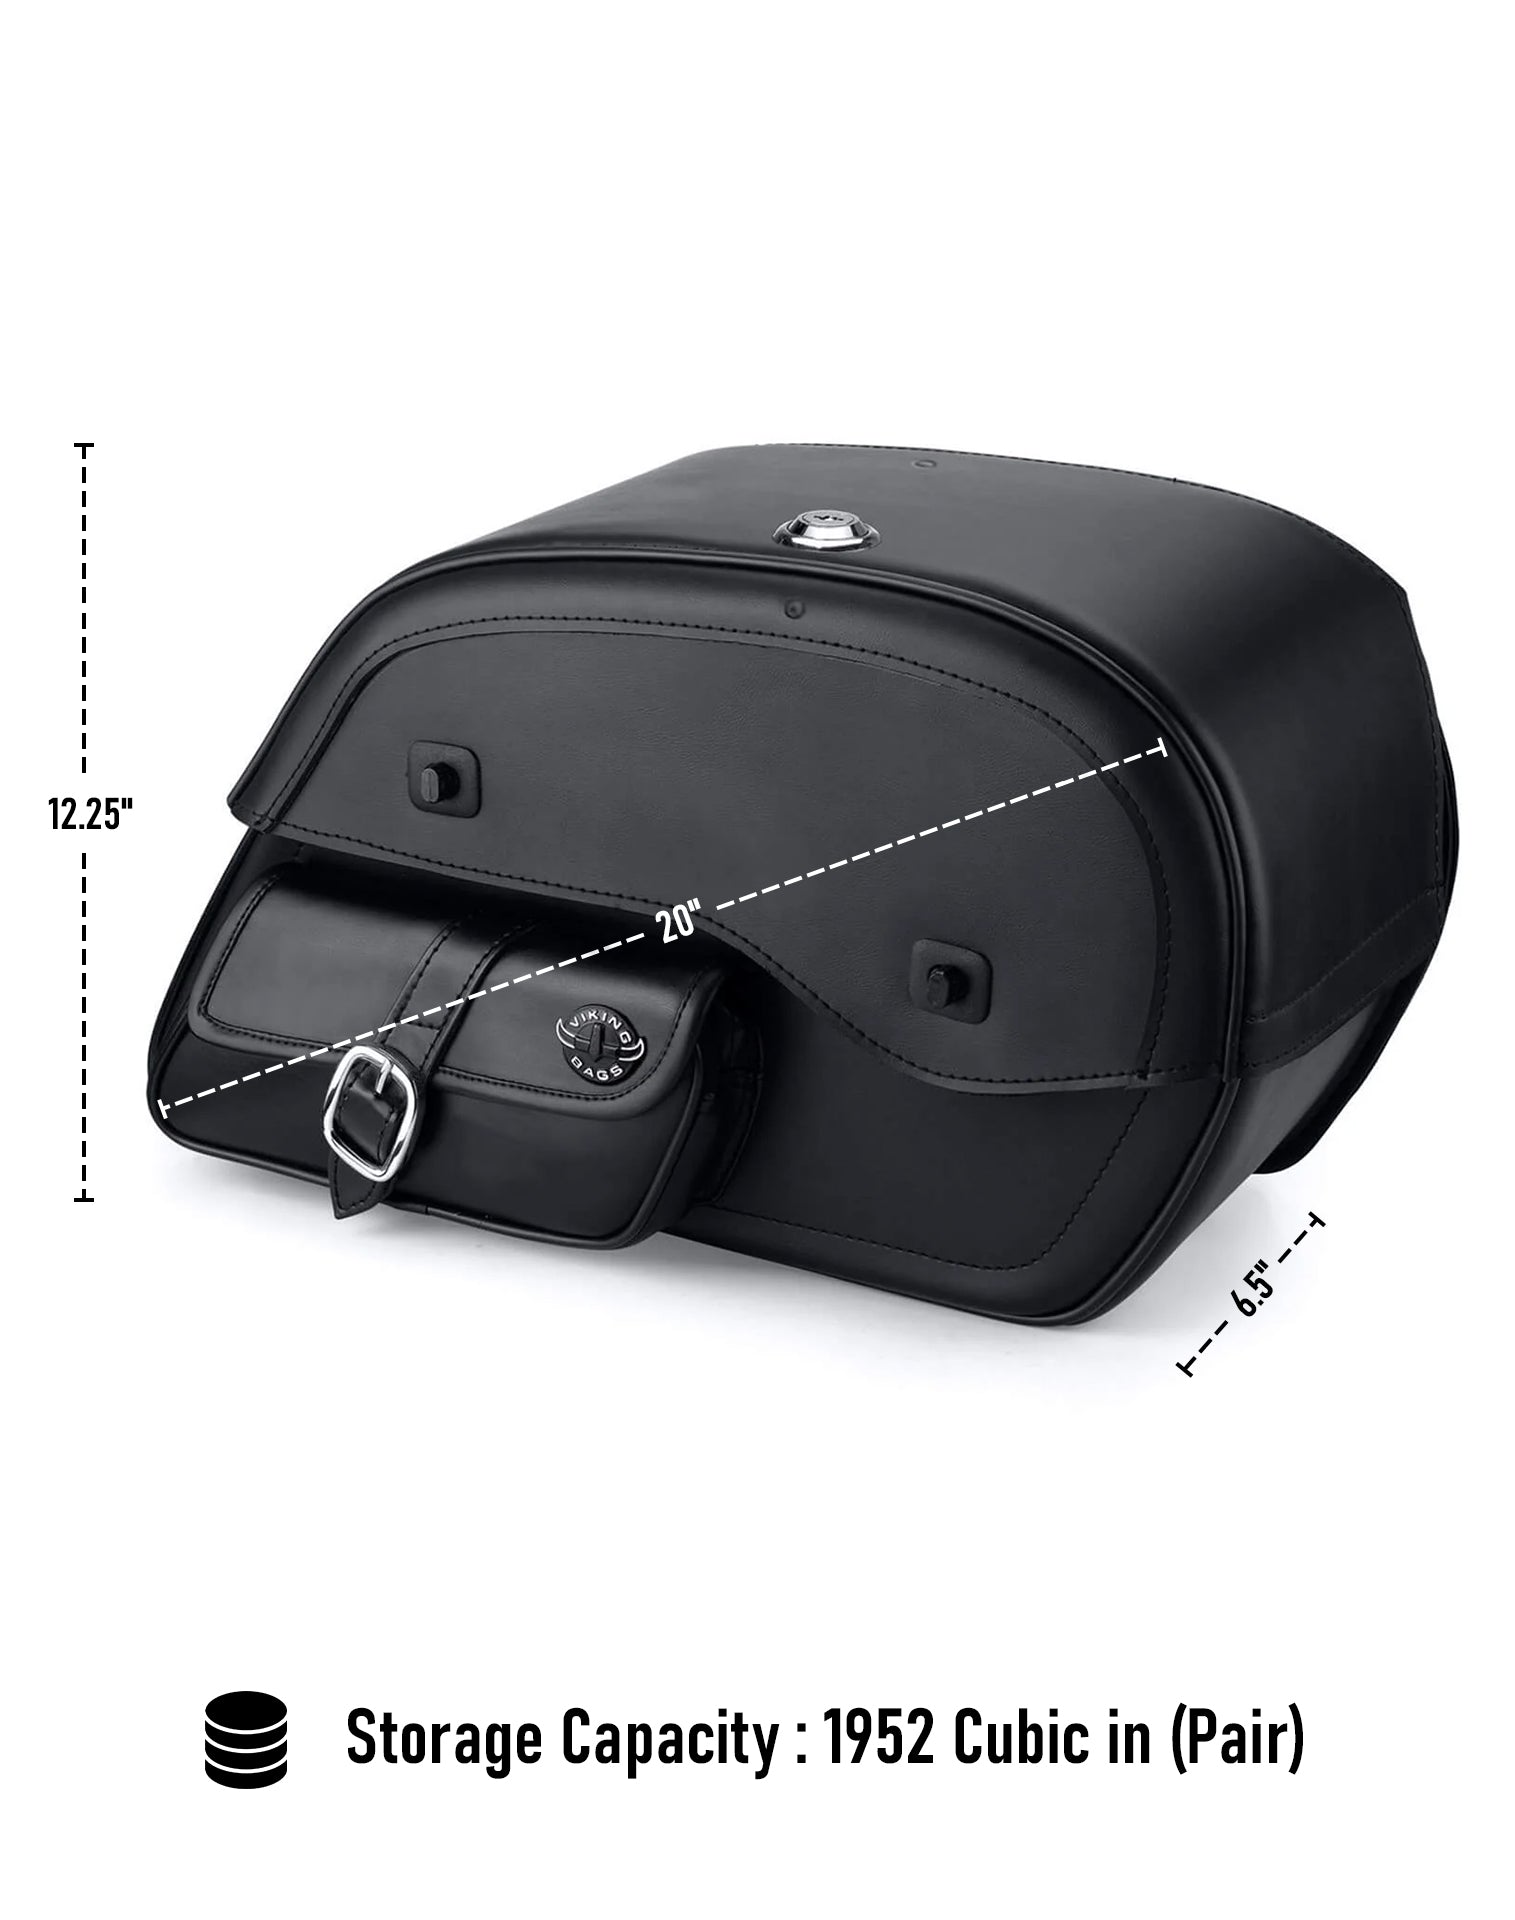 Viking Essential Side Pocket Large Leather Motorcycle Saddlebags For Harley Softail Deluxe Flstn I Can Store Your Ridings Gears